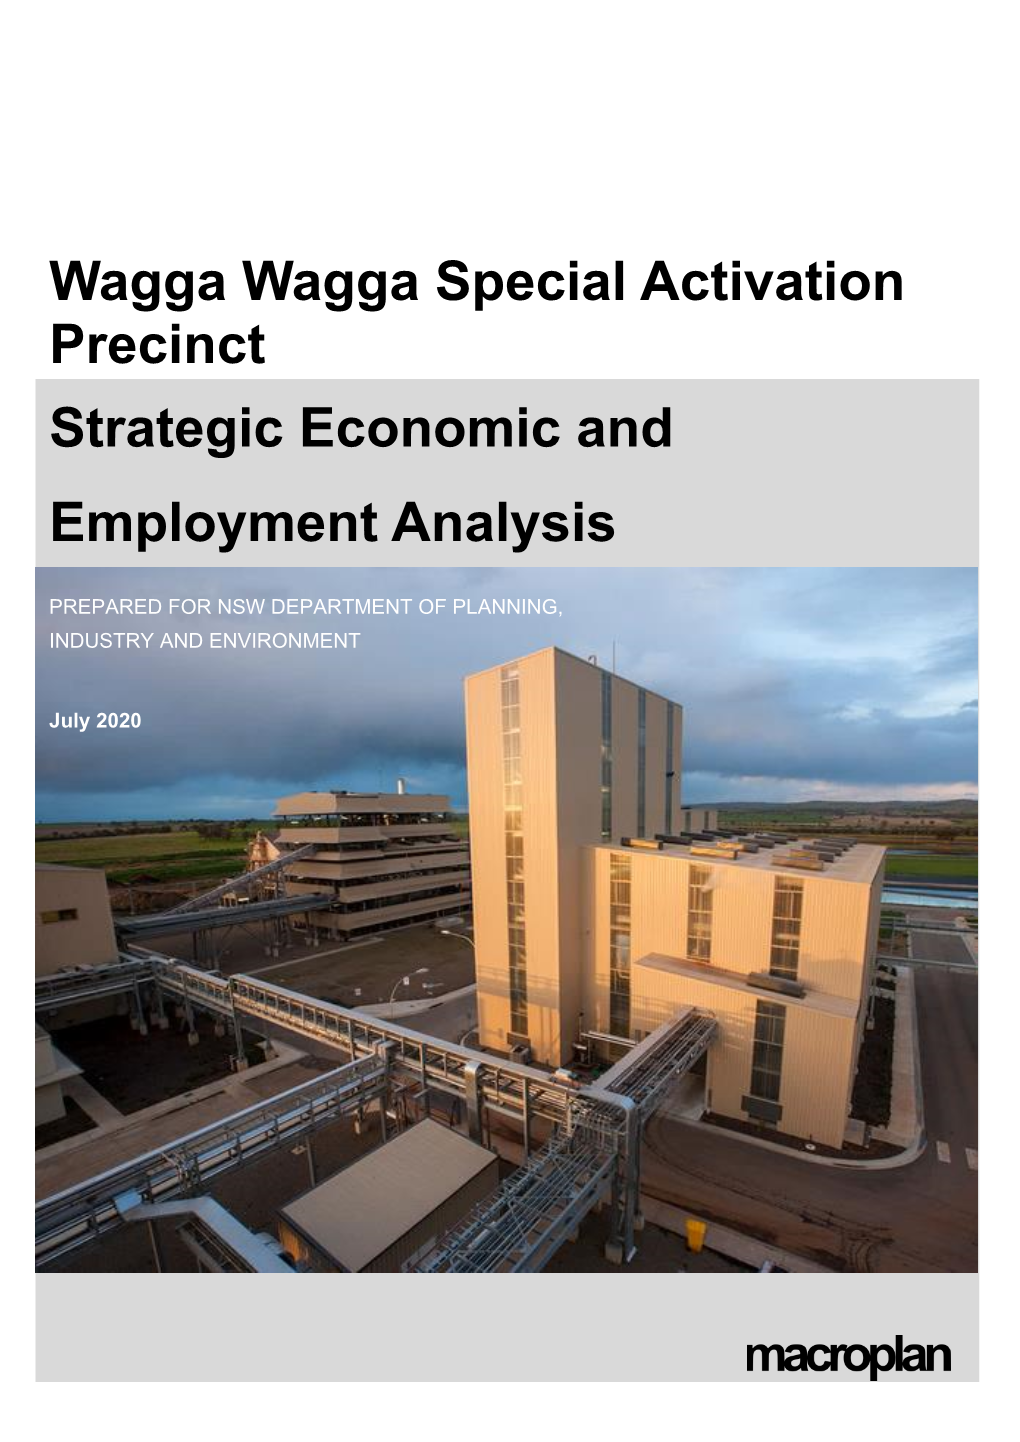 Strategic Economic and Employment Analysis to Support the Wagga Wagga SAP Master Plan